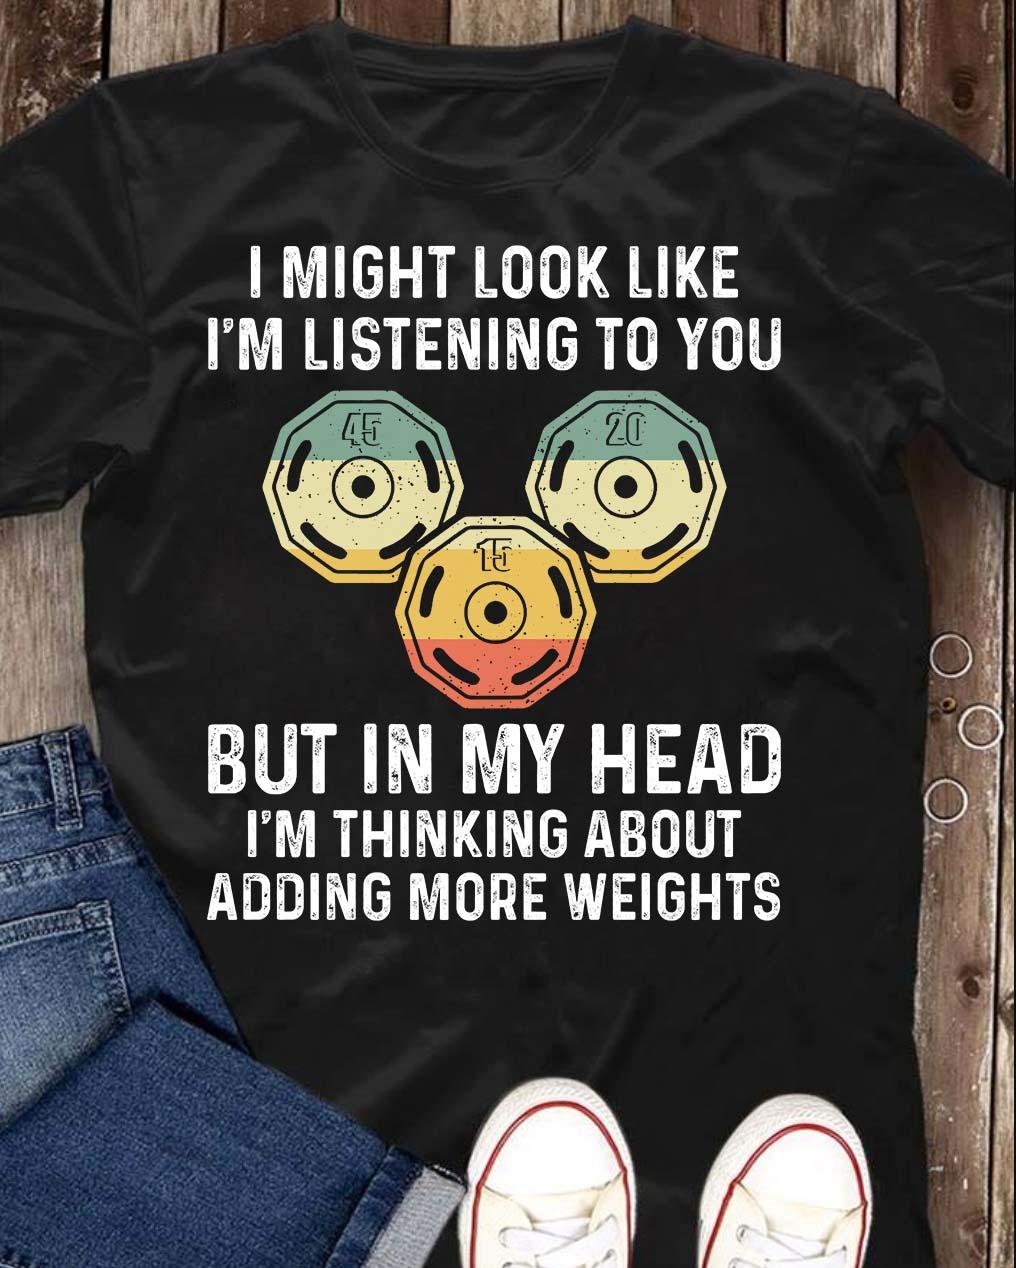 I might look like i'm listening to you but in my head i'm thiking about adding more weights